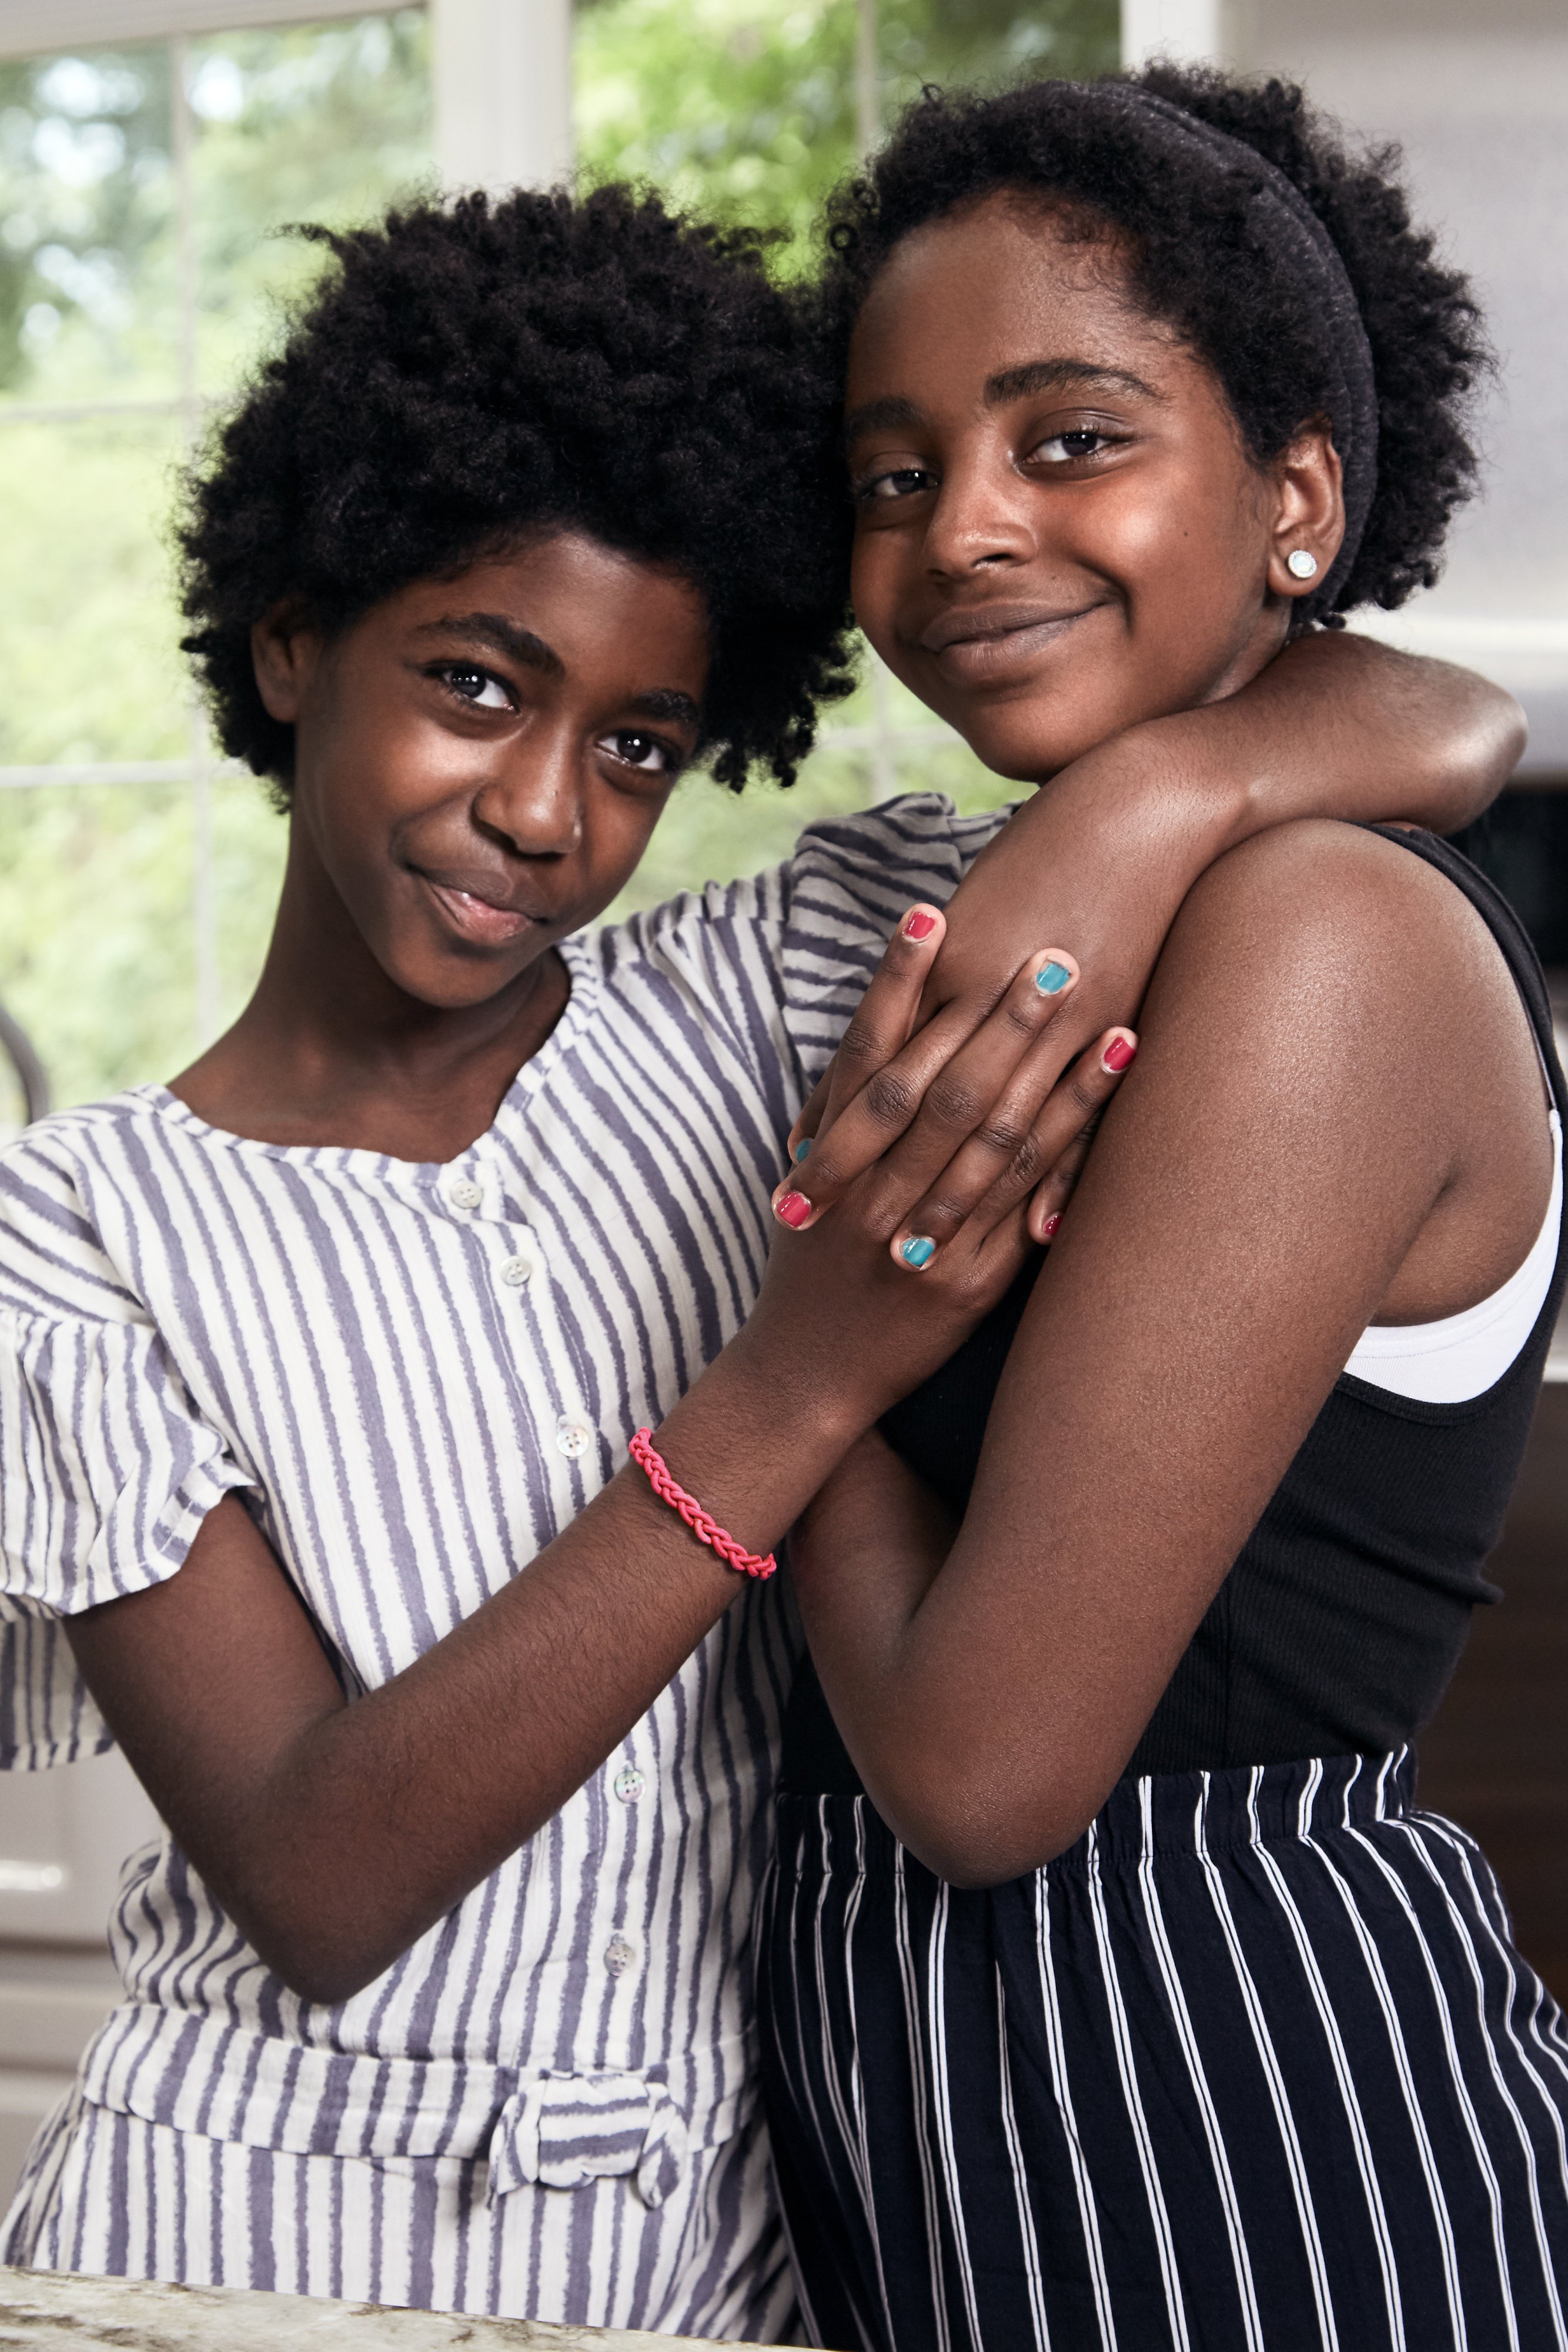 Naomi and her sister, Sarah, were adopted from Ethiopia by their mother, Julie Wadler, a former Republican operative.